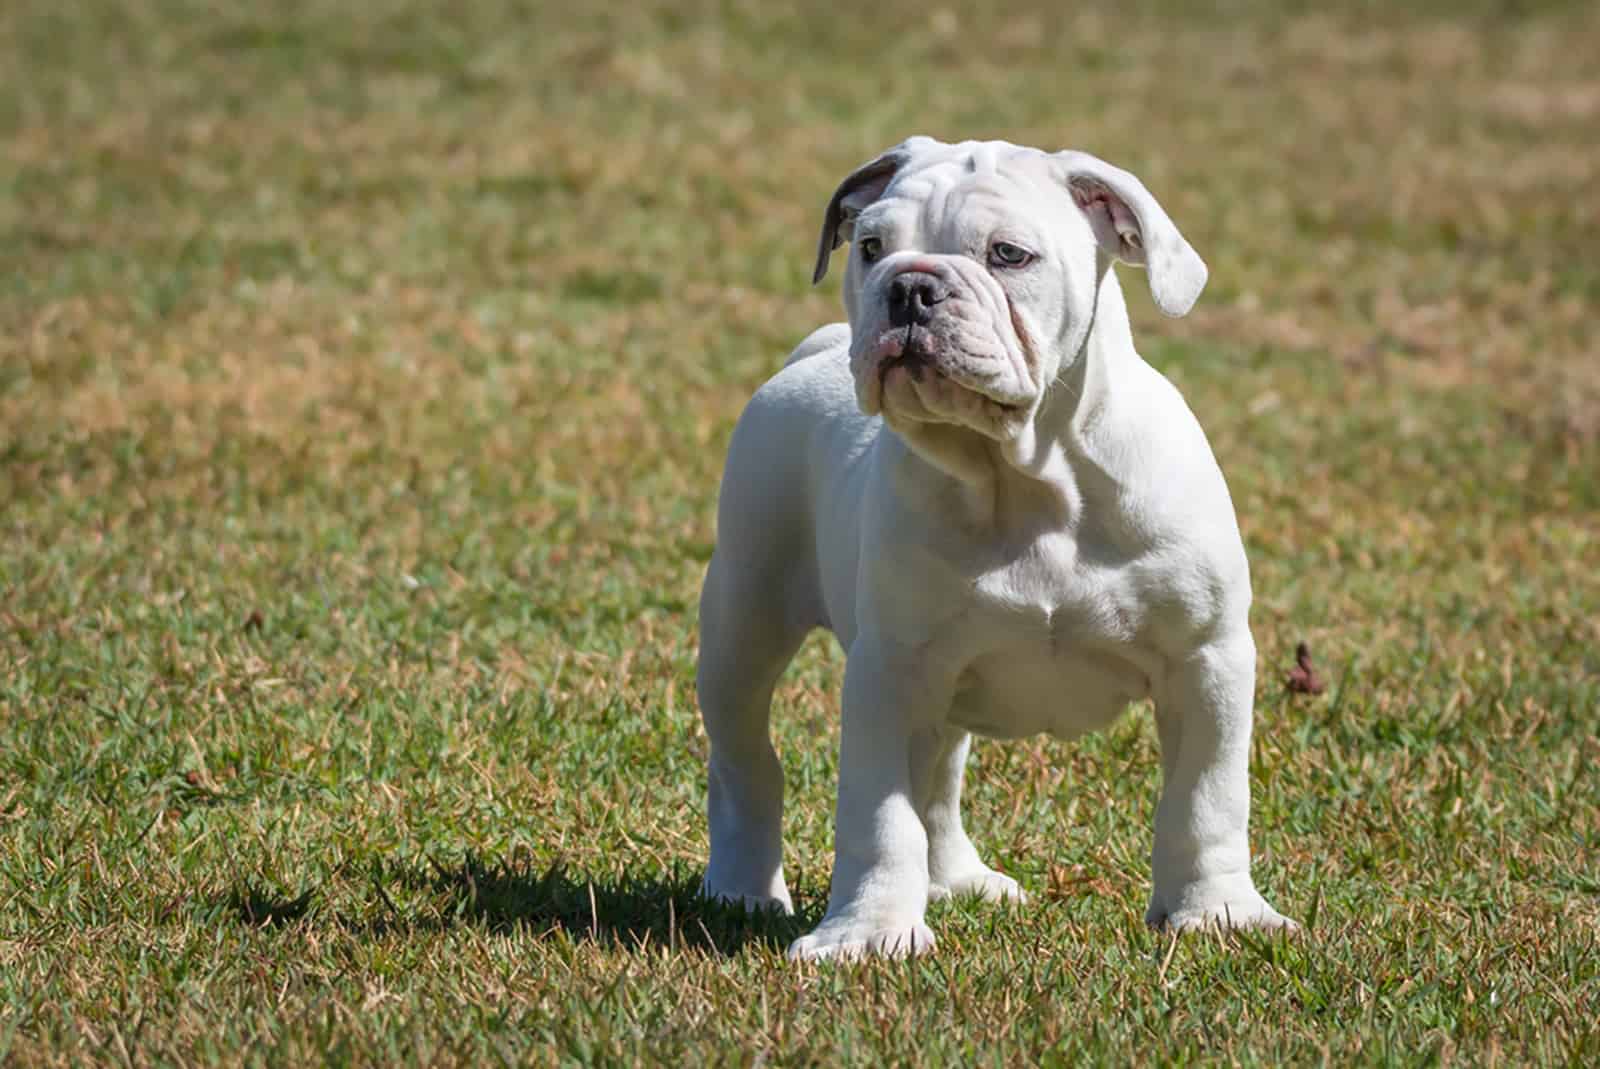 olde english bulldogge standing on the grass